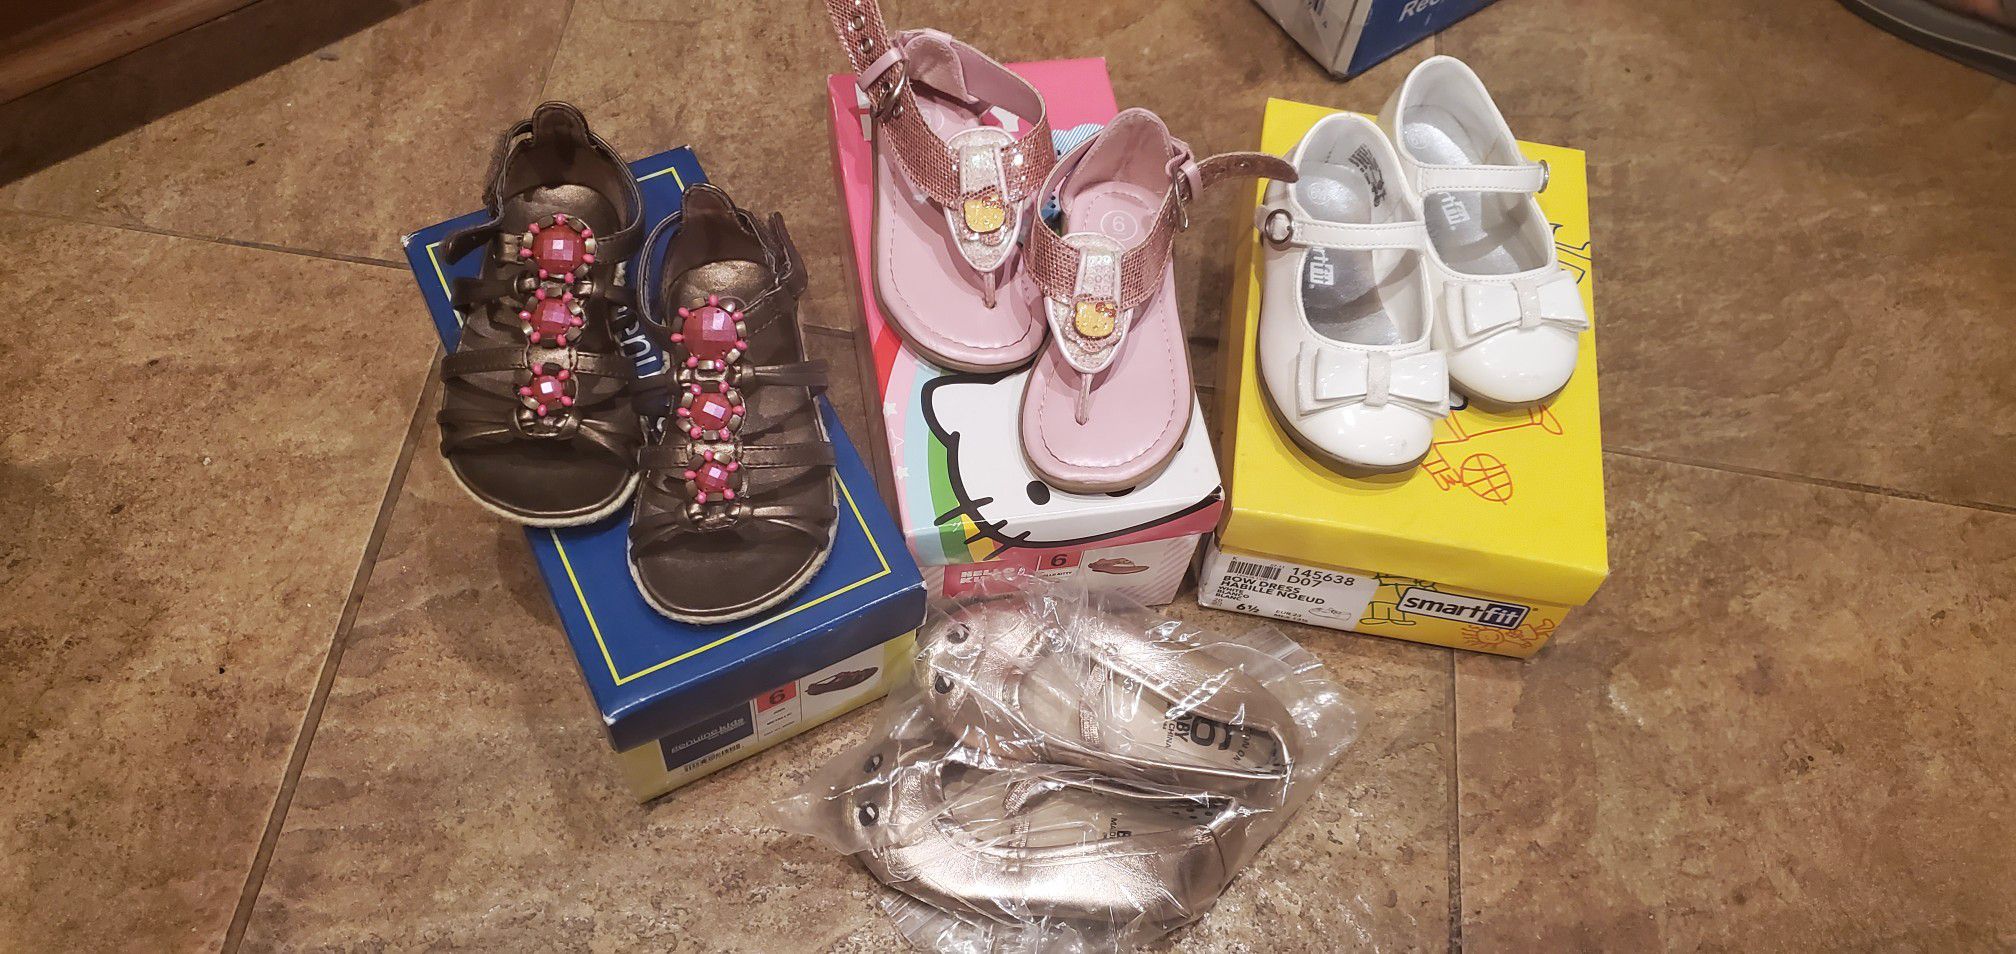 *PENDING PICK-UP* FREE - Size 6 Kids/Girls Shoes